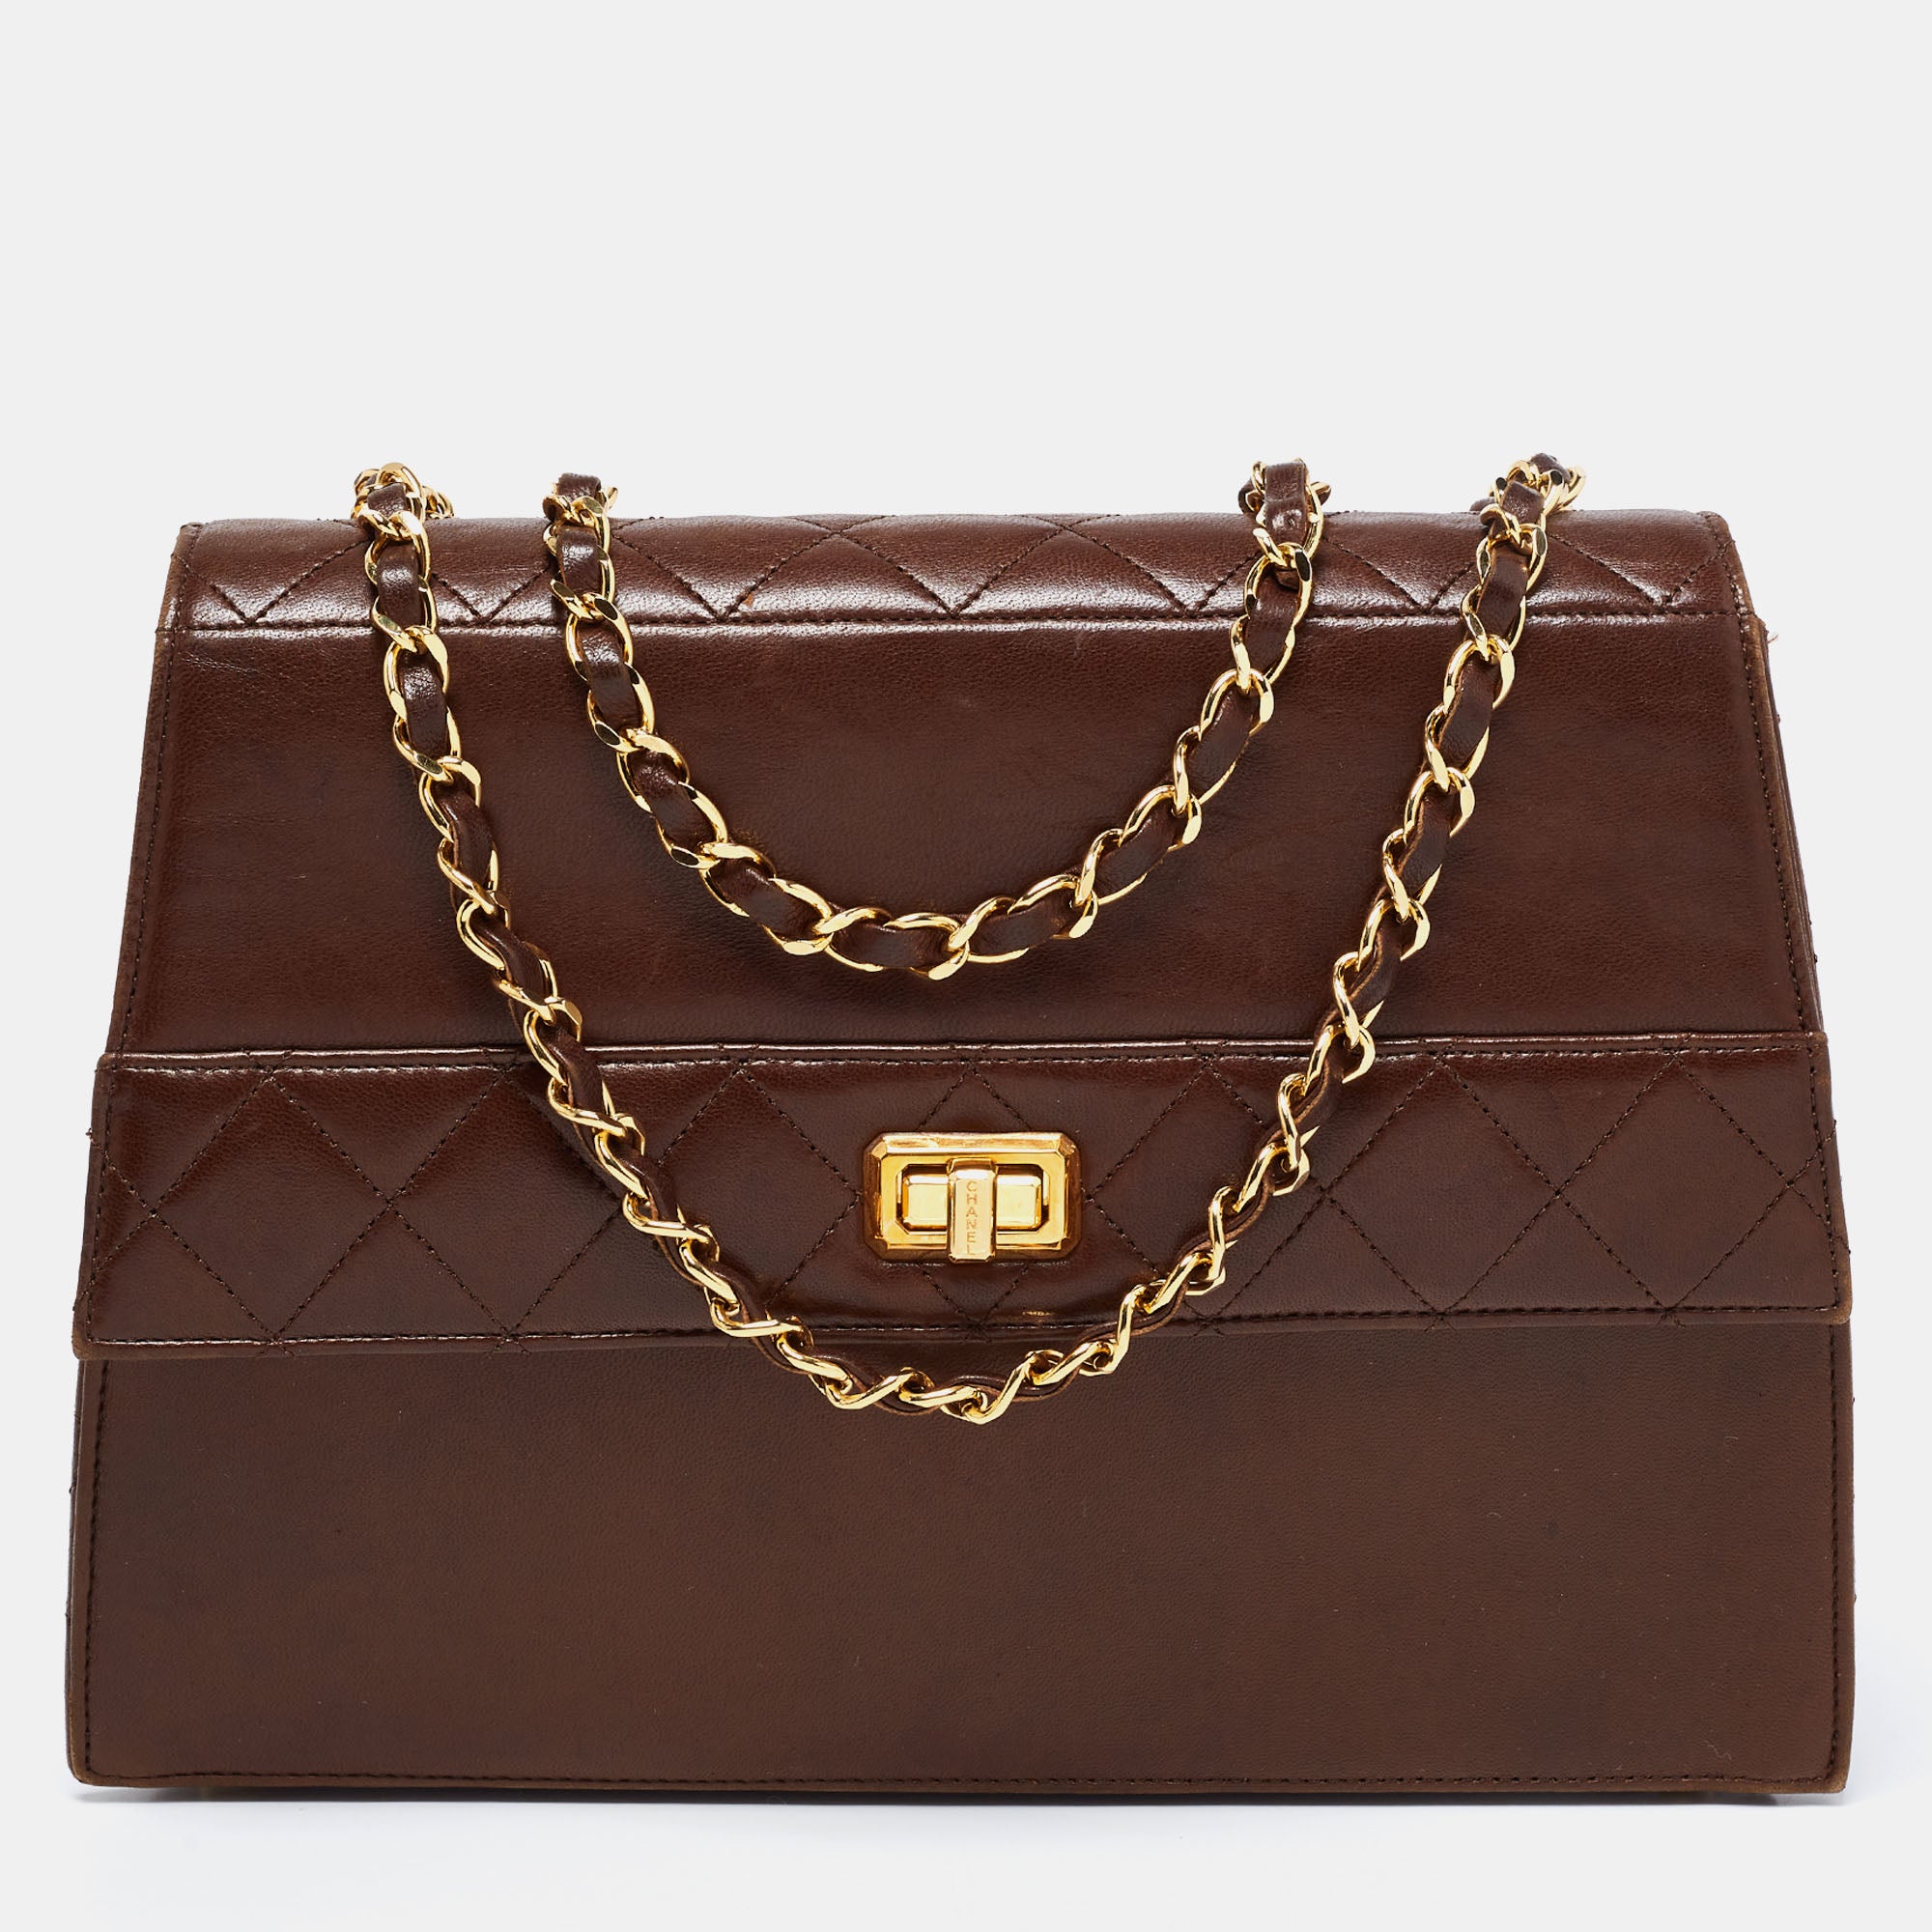 Chanel Brown Leather Vintage Trapezoid Flap Bag